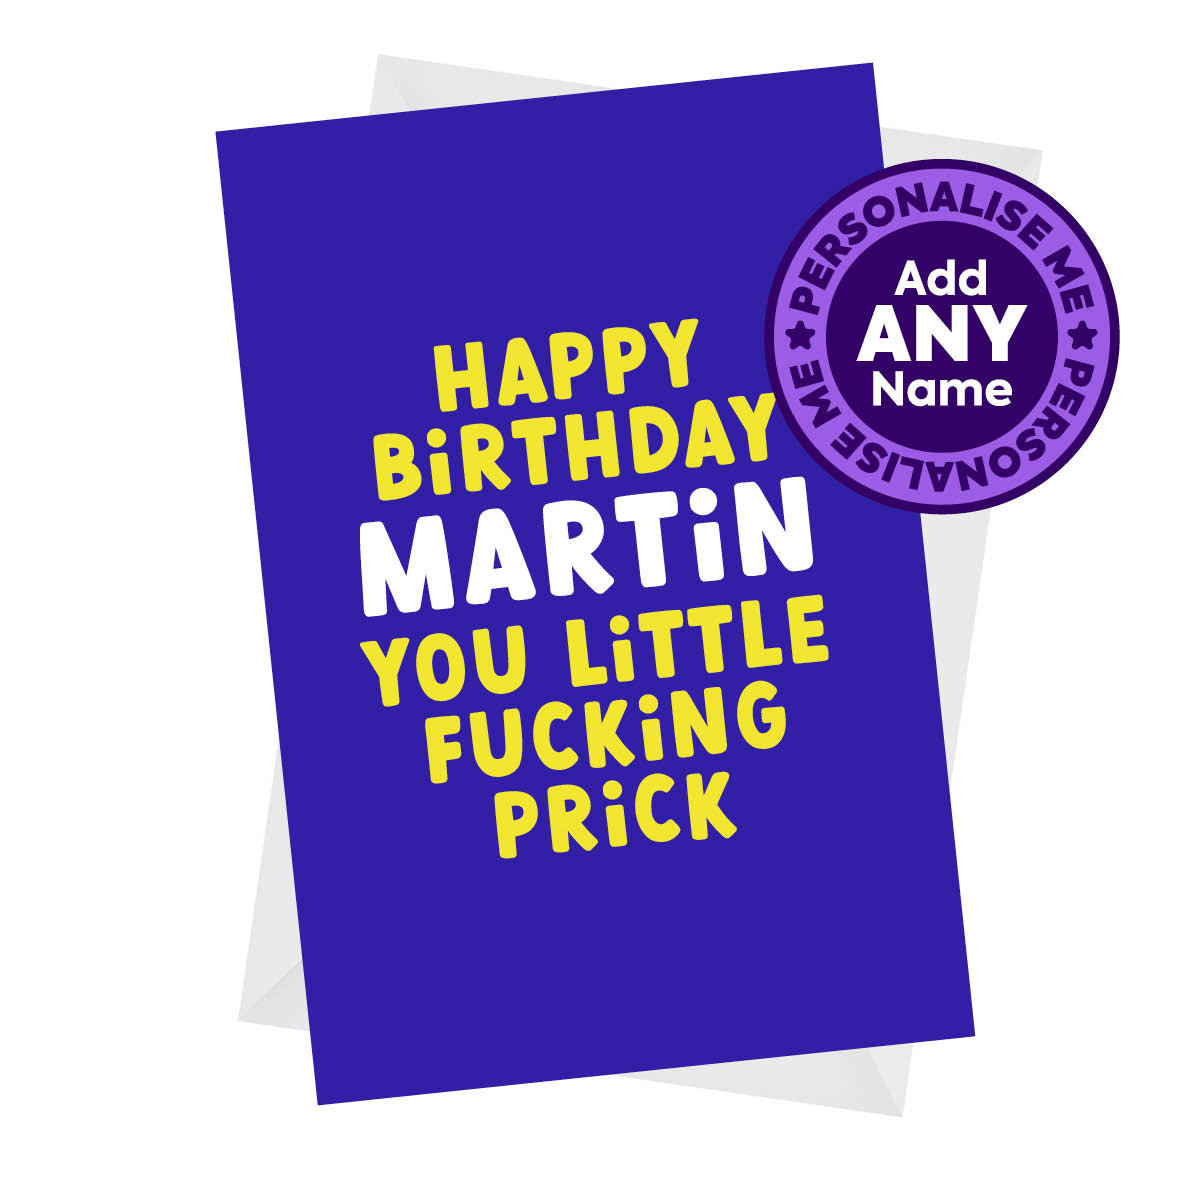 You Little Fucking Prick - Rude Personalised Birthday Card